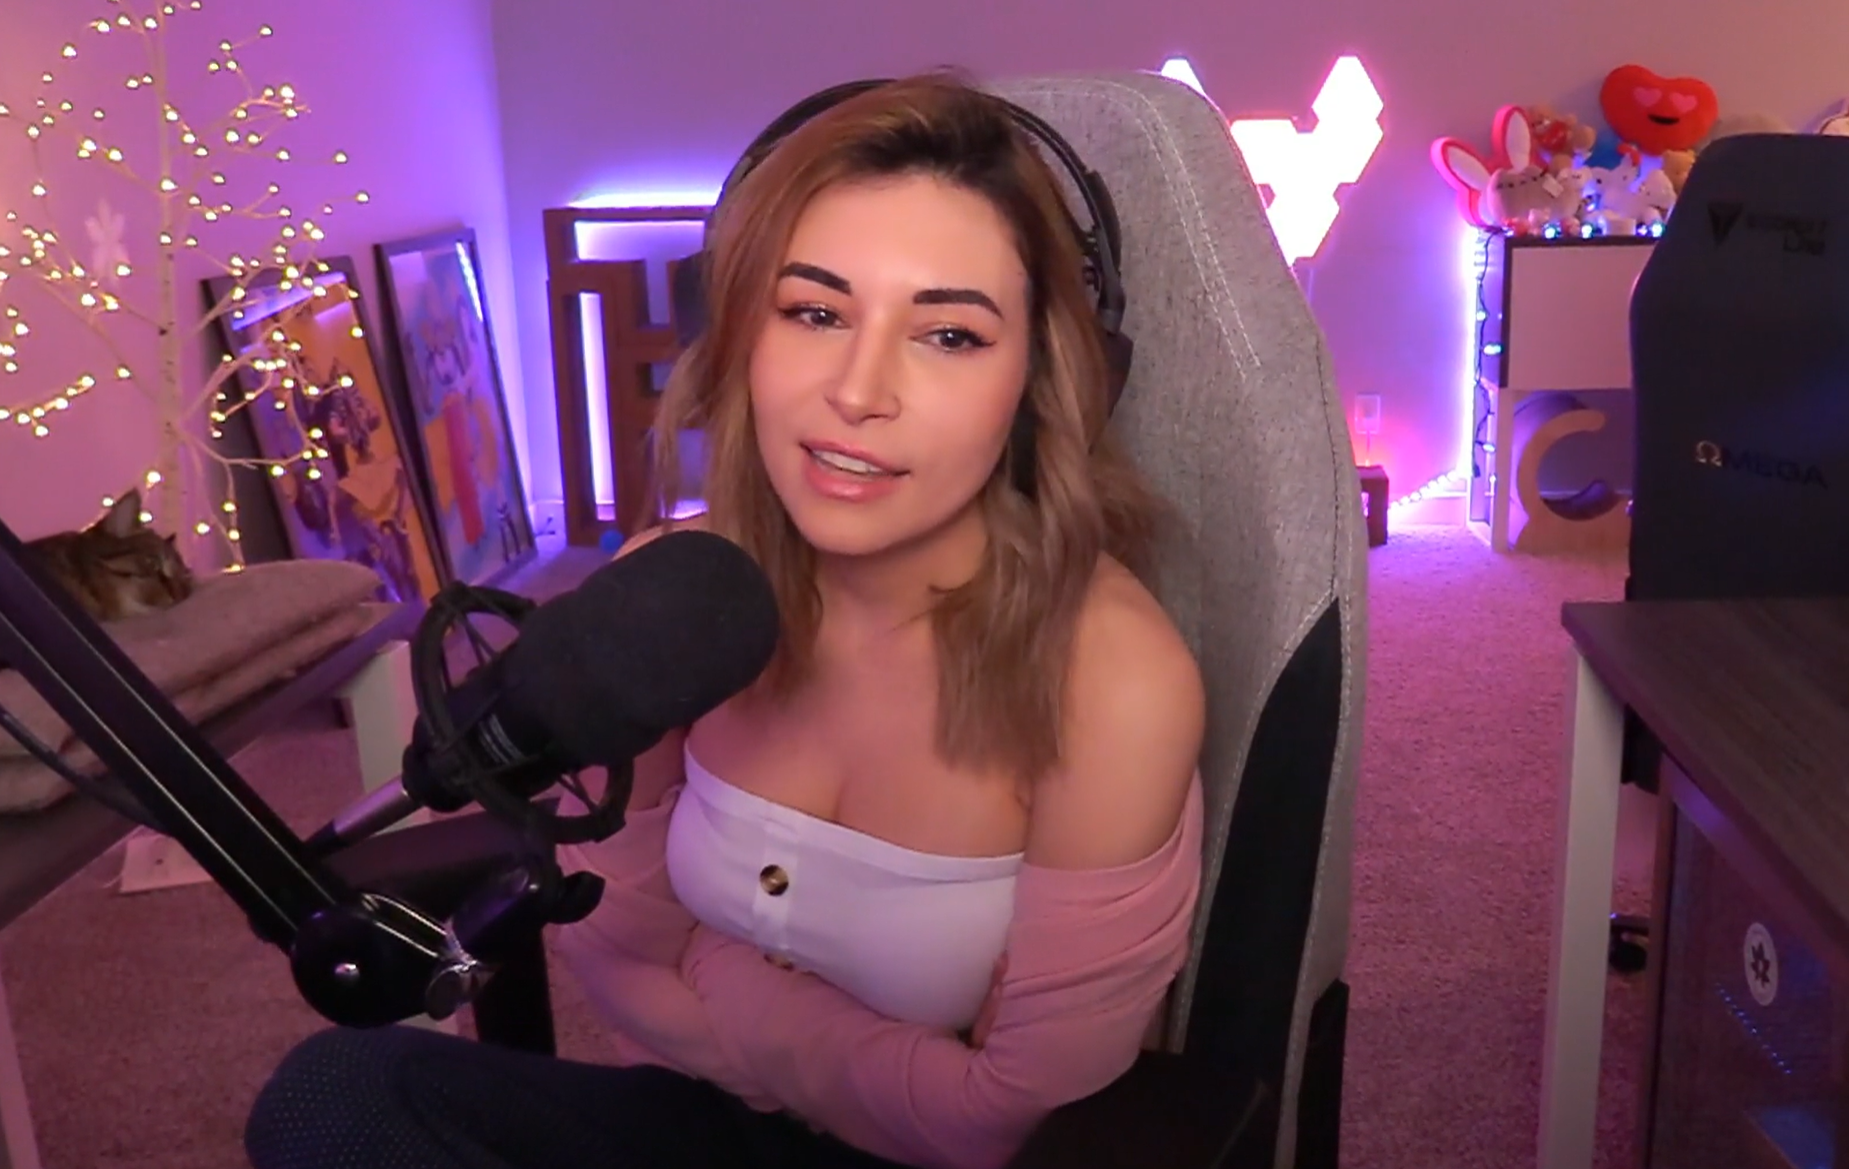 Nude female twitch streamers